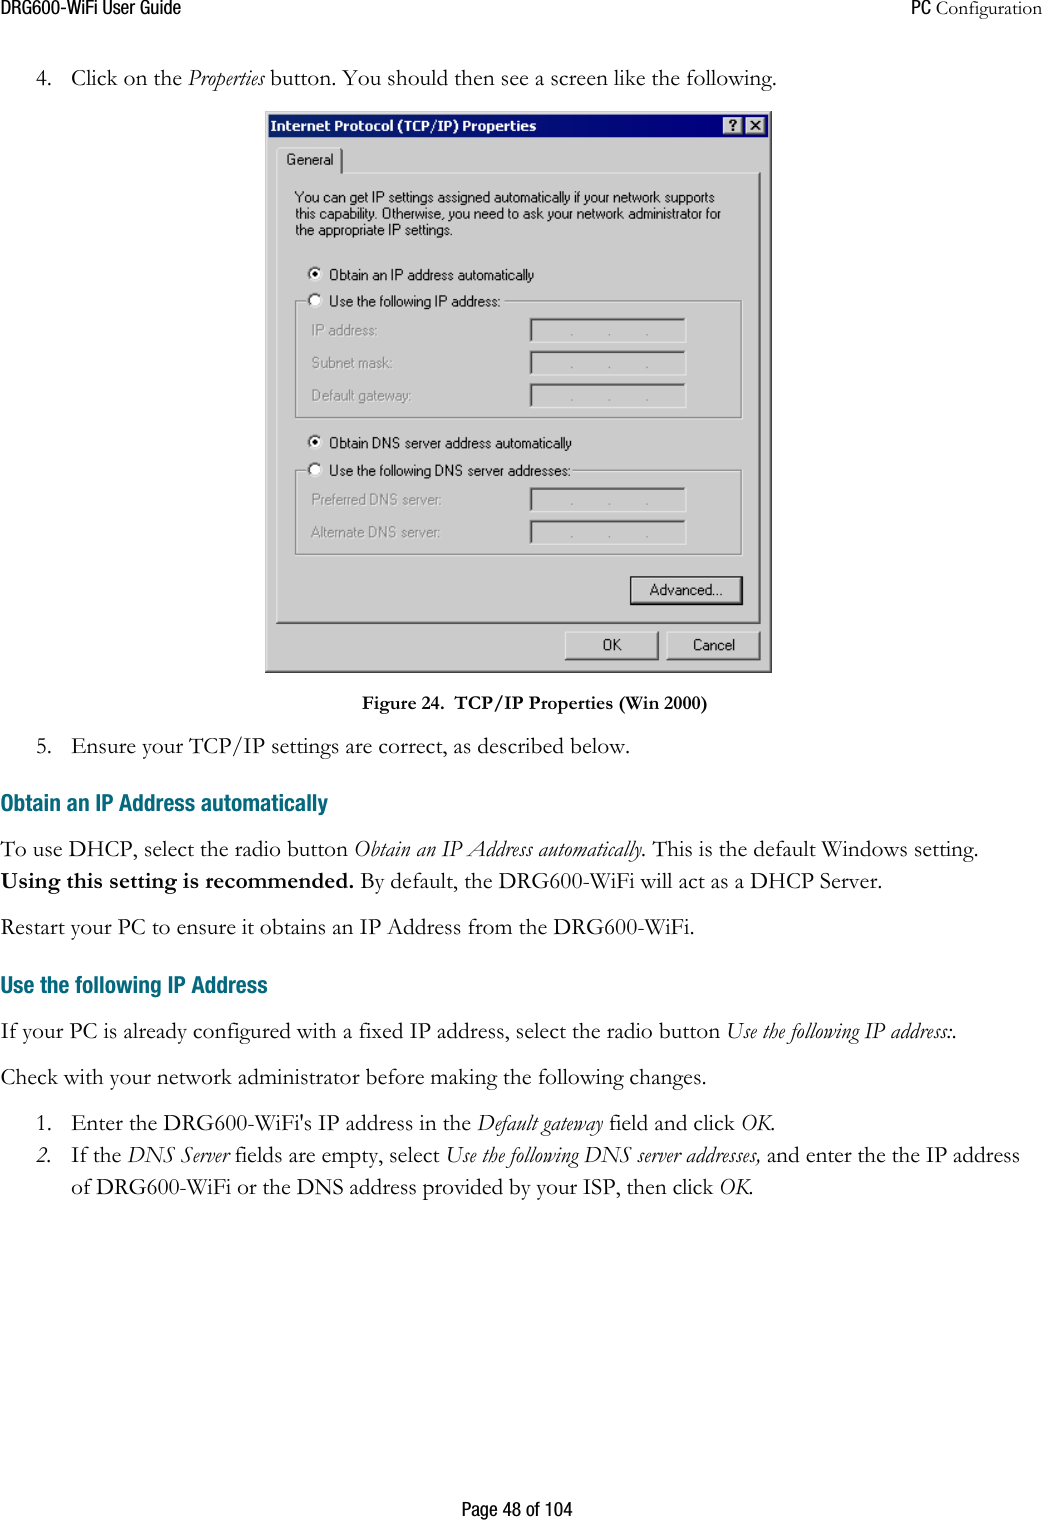 DRG600WiFi User Guide  PC Configuration  Page 48 of 104 4. Click on the Properties button. You should then see a screen like the following.  Figure 24. TCP/IP Properties (Win 2000)  5. Ensure your TCP/IP settings are correct, as described below.  Obtain an IP Address automatically To use DHCP, select the radio button Obtain an IP Address automatically. This is the default Windows setting. Using this setting is recommended. By default, the DRG600-WiFi will act as a DHCP Server. Restart your PC to ensure it obtains an IP Address from the DRG600-WiFi.  Use the following IP Address If your PC is already configured with a fixed IP address, select the radio button Use the following IP address:.  Check with your network administrator before making the following changes. 1. Enter the DRG600-WiFi&apos;s IP address in the Default gateway field and click OK.  2. If the DNS Server fields are empty, select Use the following DNS server addresses, and enter the the IP address of DRG600-WiFi or the DNS address provided by your ISP, then click OK.   